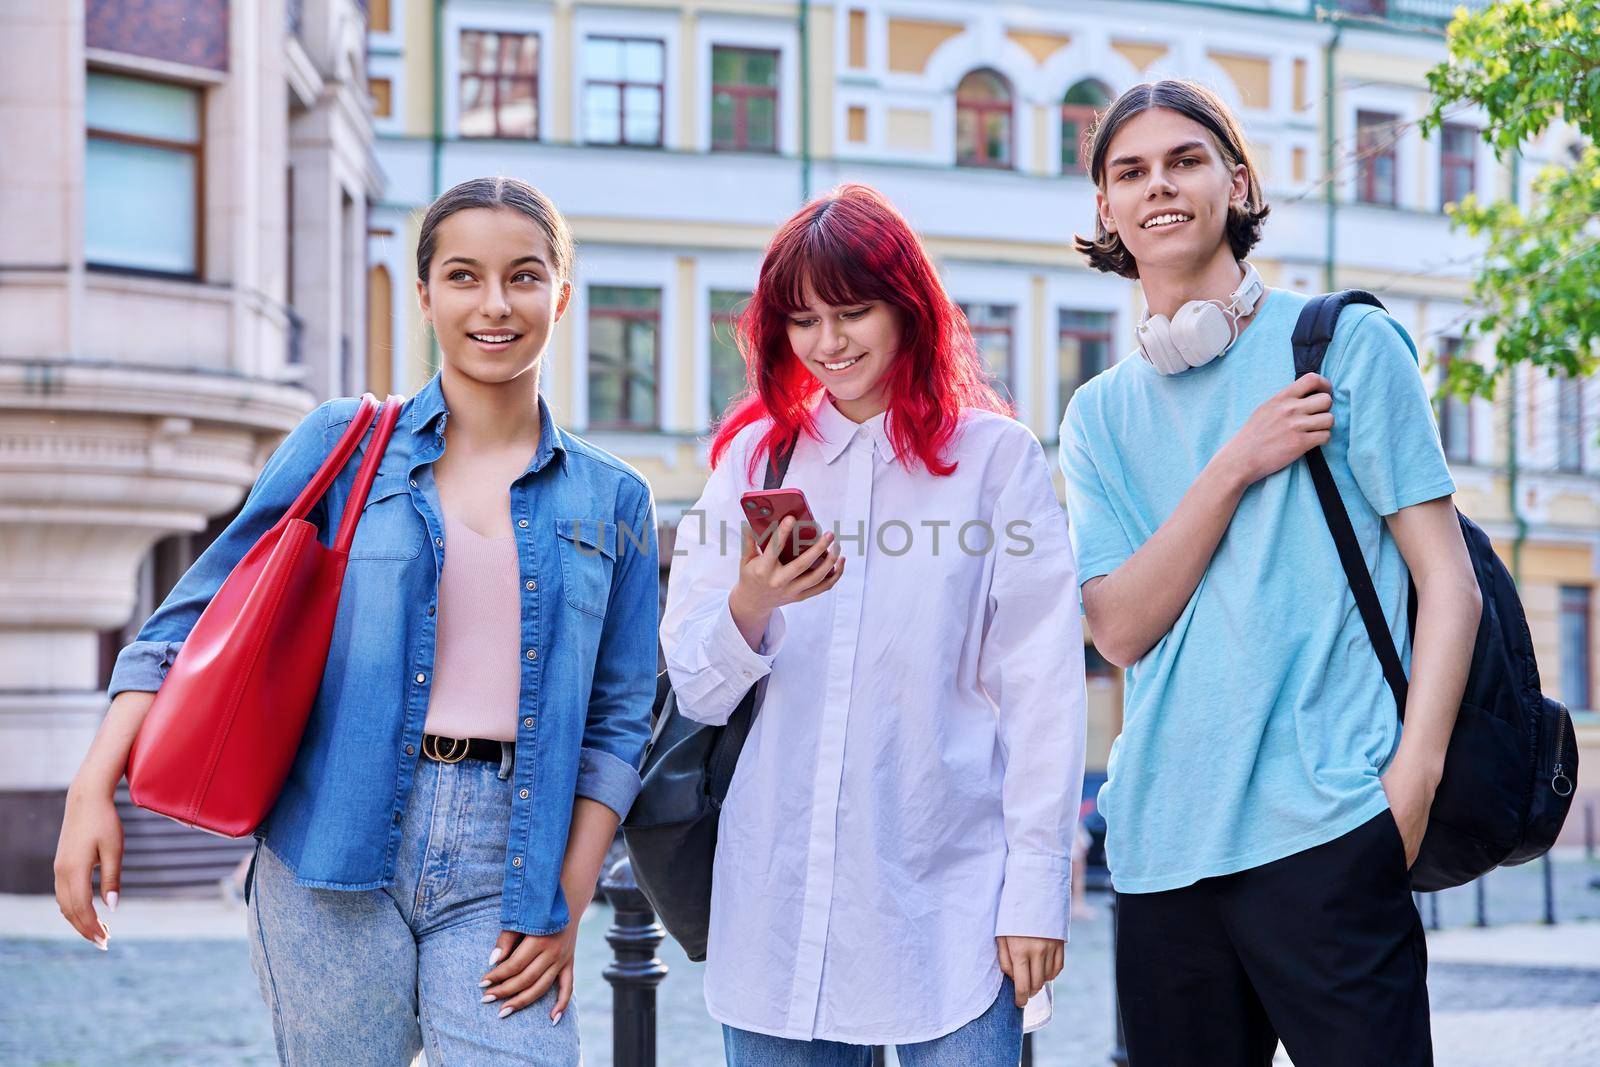 Three teenage friends met talking having fun outdoors. Smiling laughing teenagers with smartphone, together on city street. Communication, friendship, youth, lifestyle concept